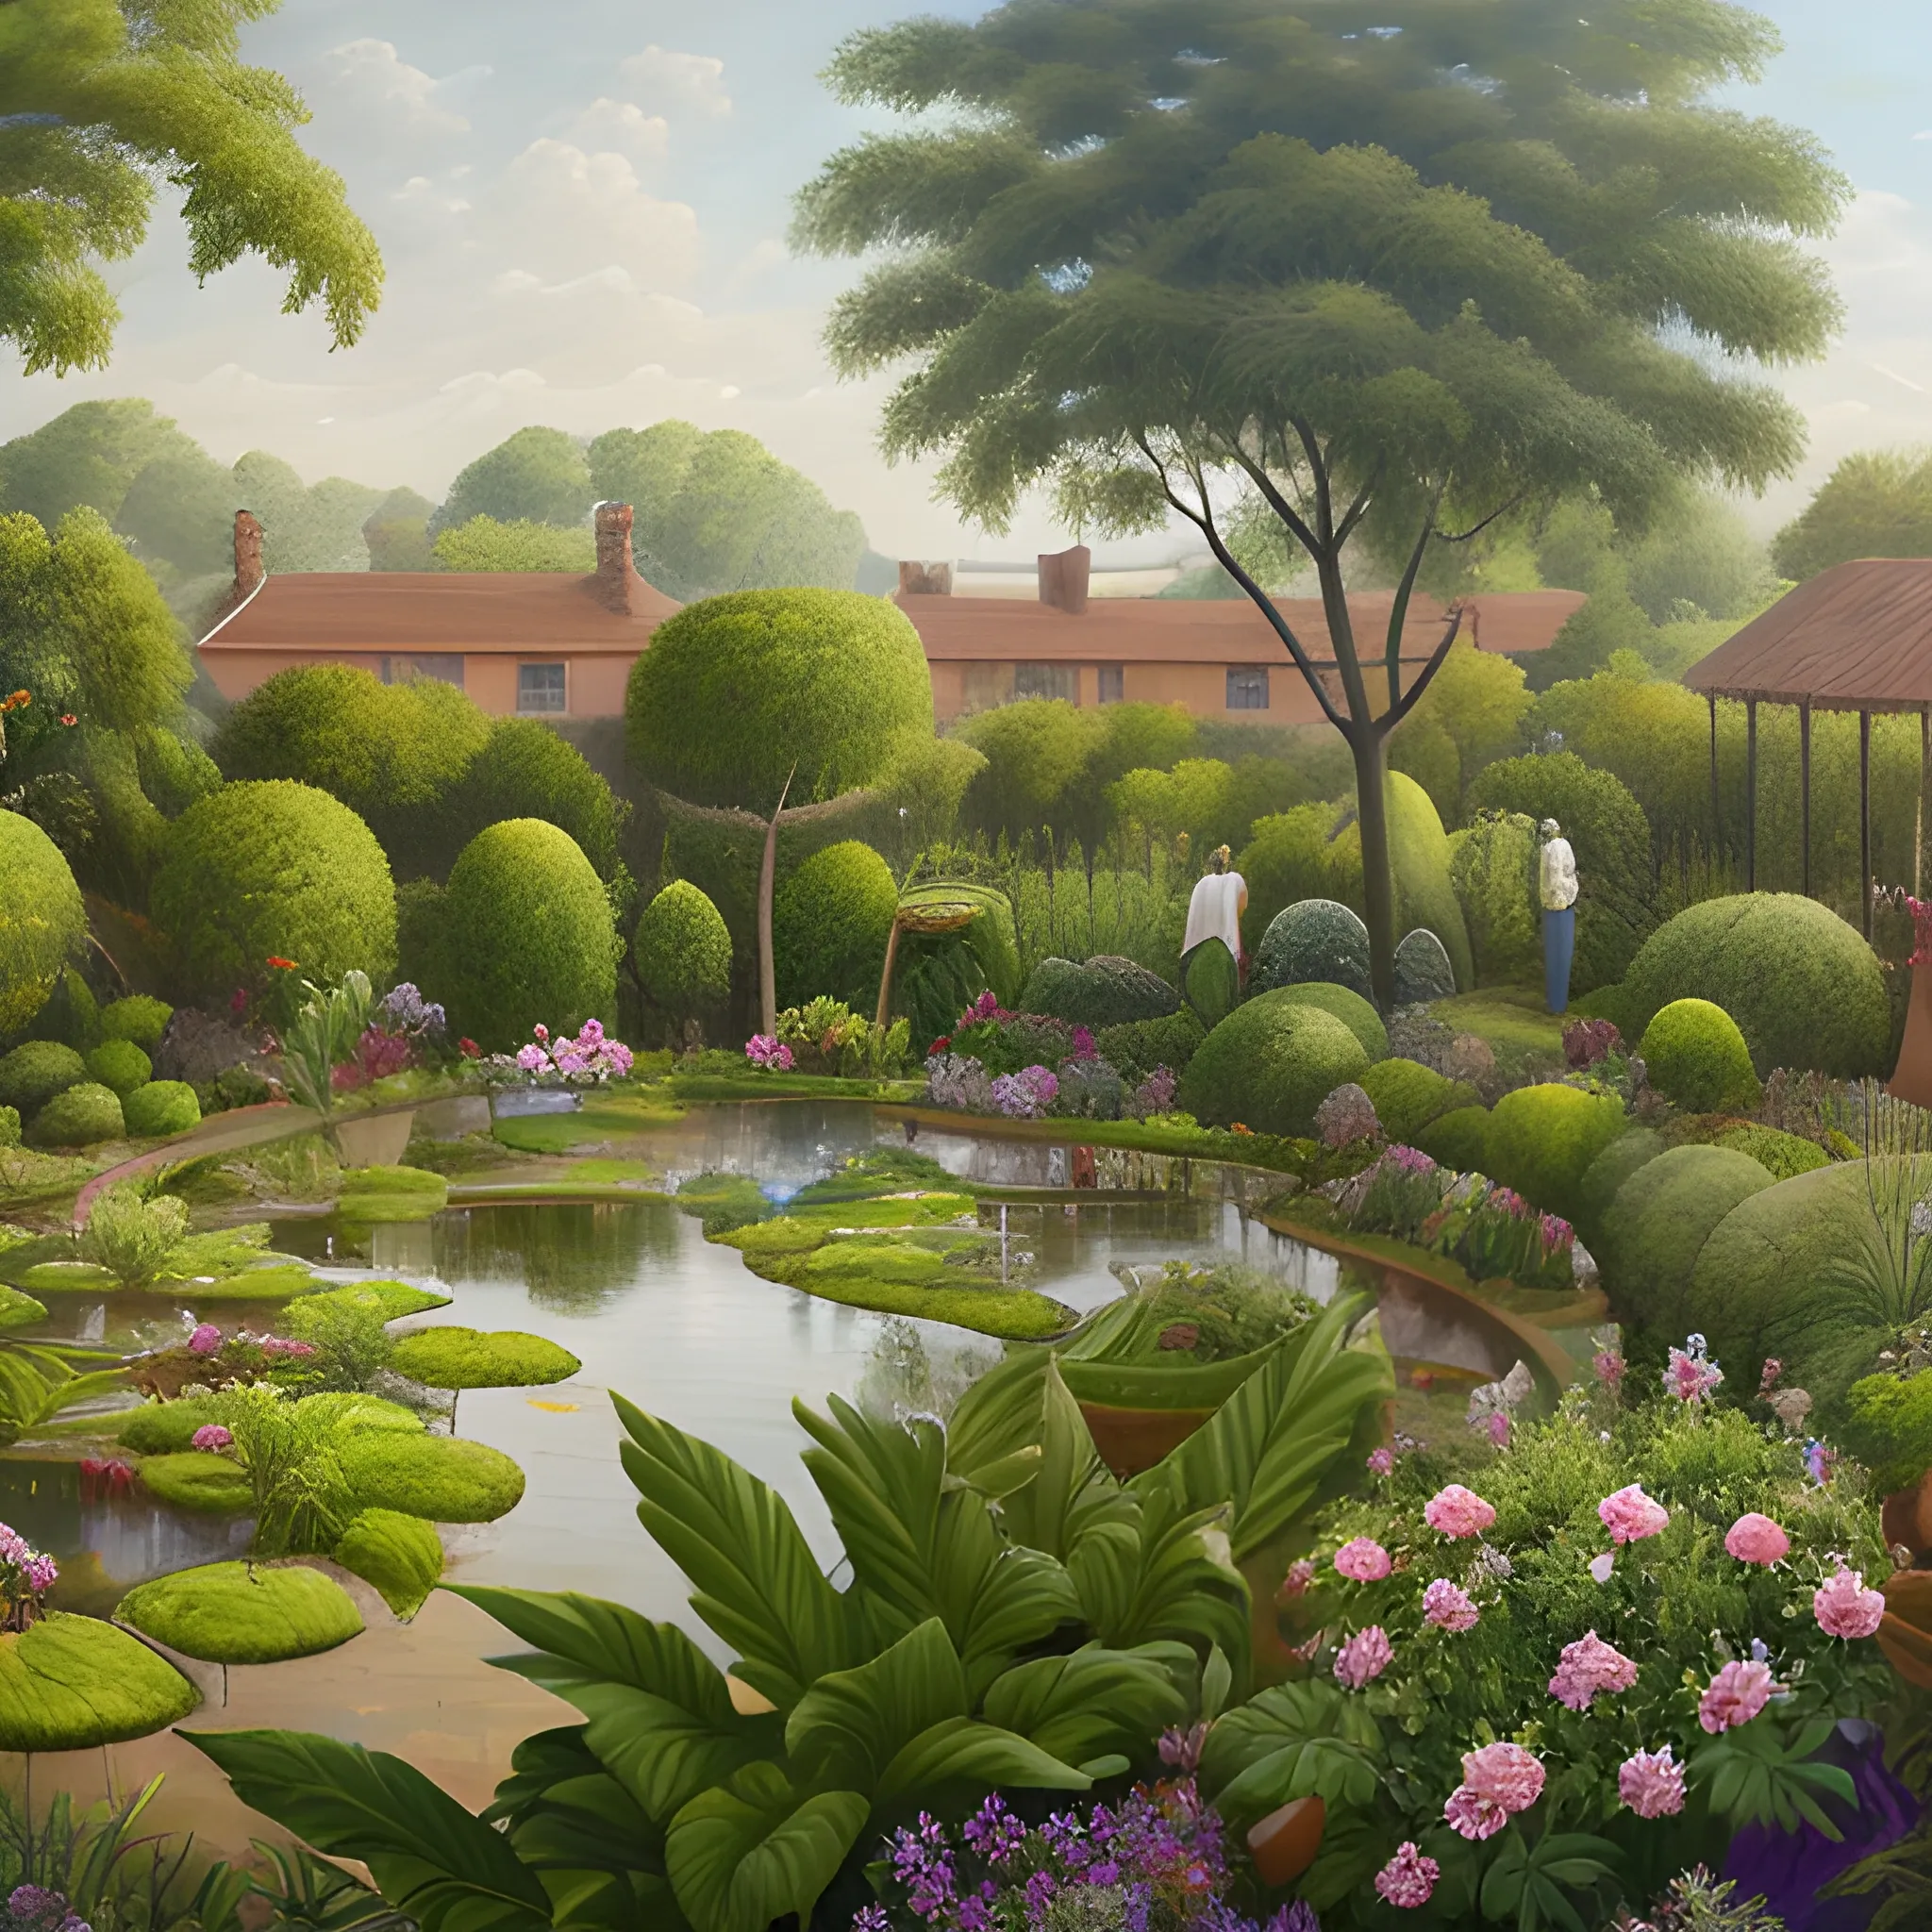 3. A panoramic view of a lush garden being watered, representing the value of hard work and diligence., Oil Painting